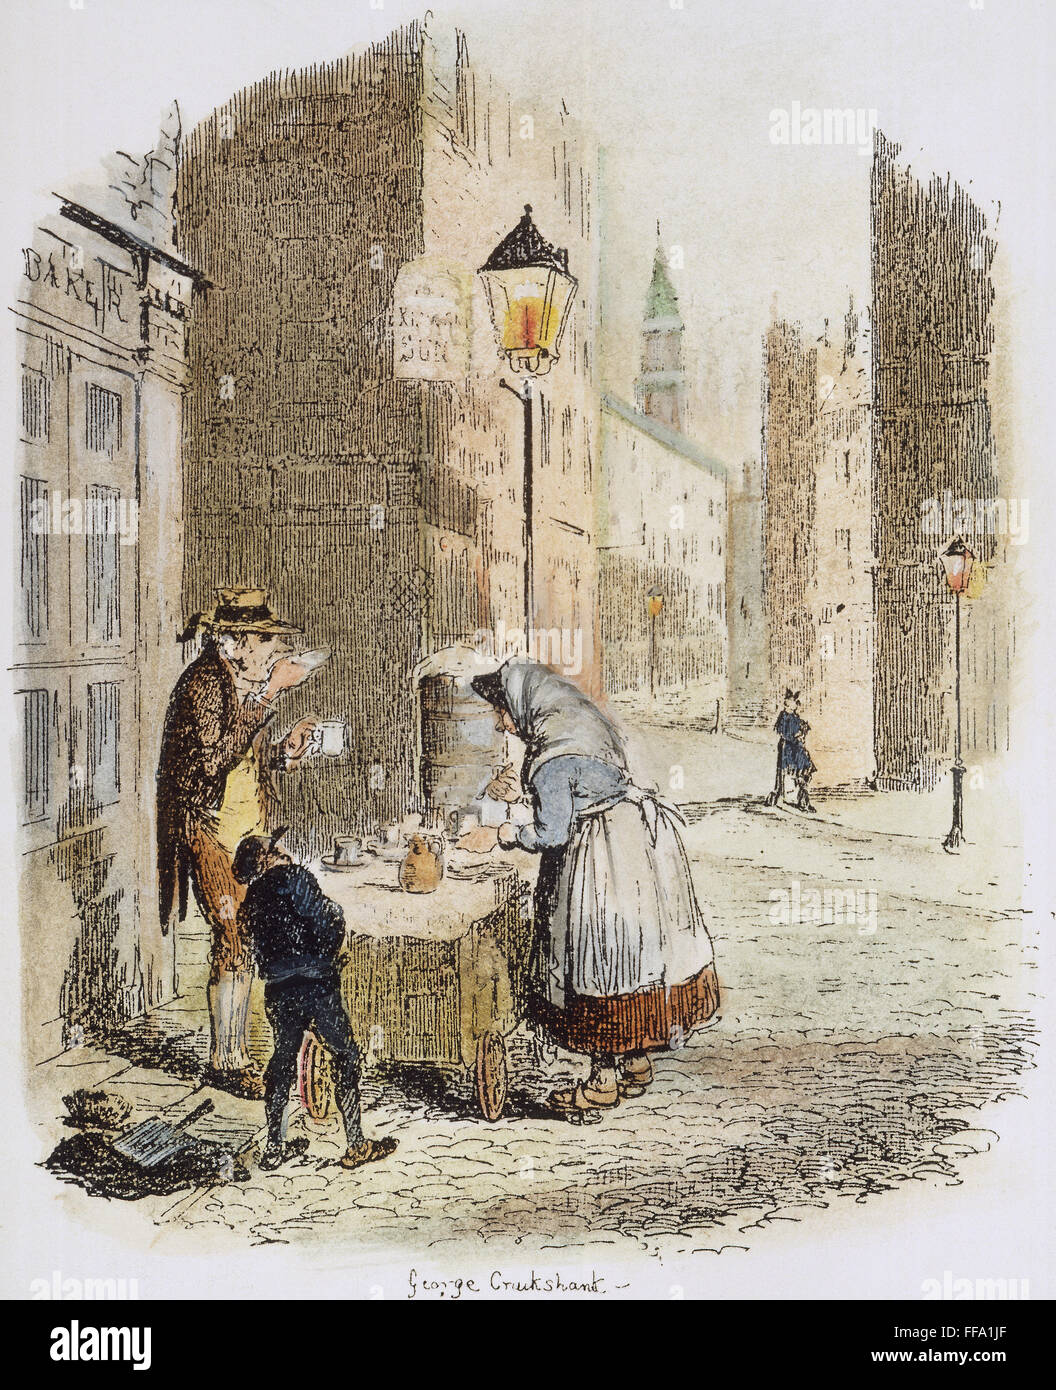 DICKENS: SKETCHES, 1836-37. /n'The Streets - Morning': etching by George Cruikshank for Charles Dickens' 'Sketches by Boz,' 1836-37. Stock Photo